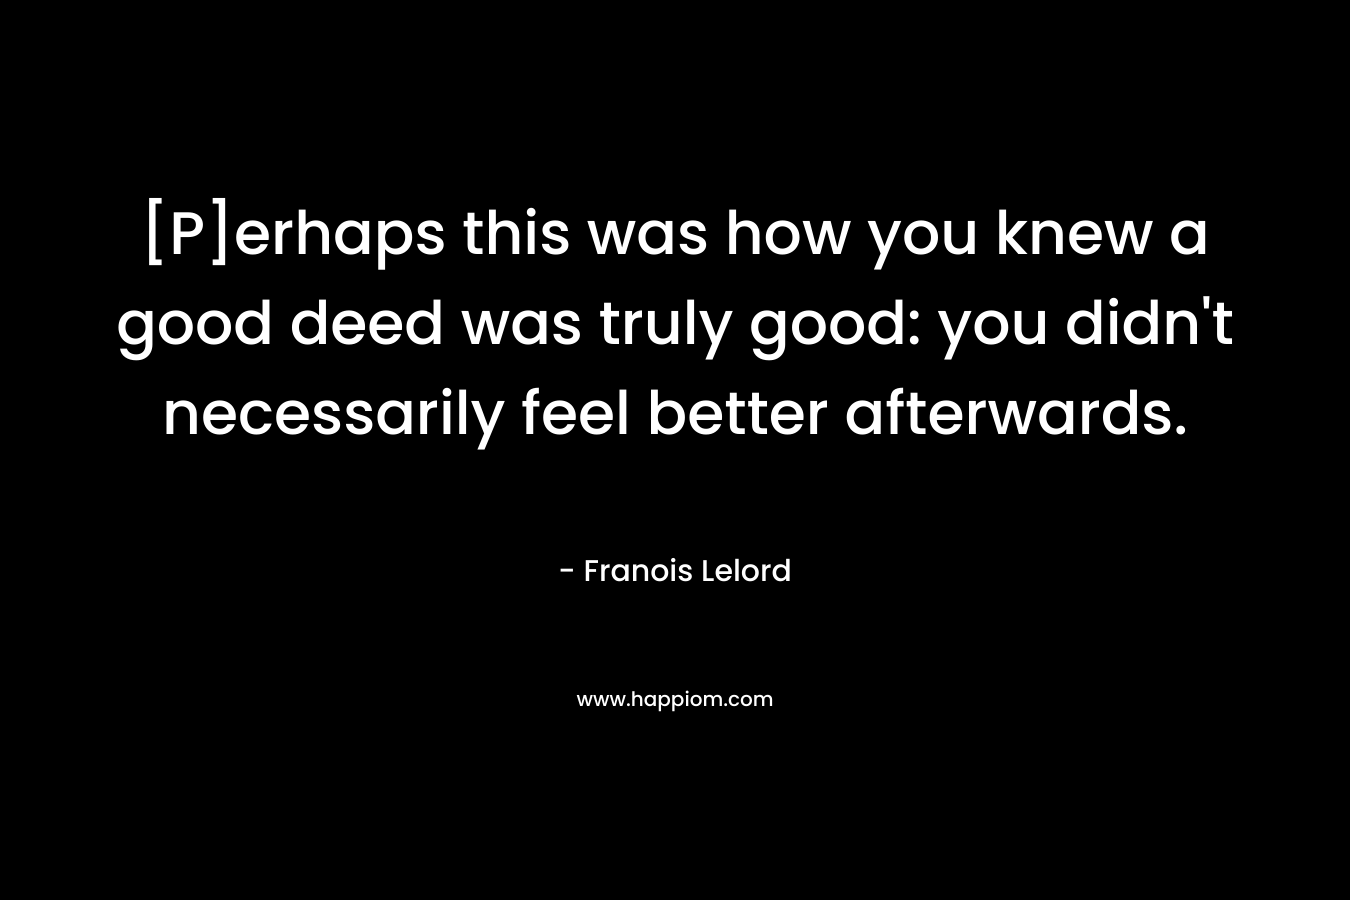 [P]erhaps this was how you knew a good deed was truly good: you didn’t necessarily feel better afterwards. – Franois Lelord